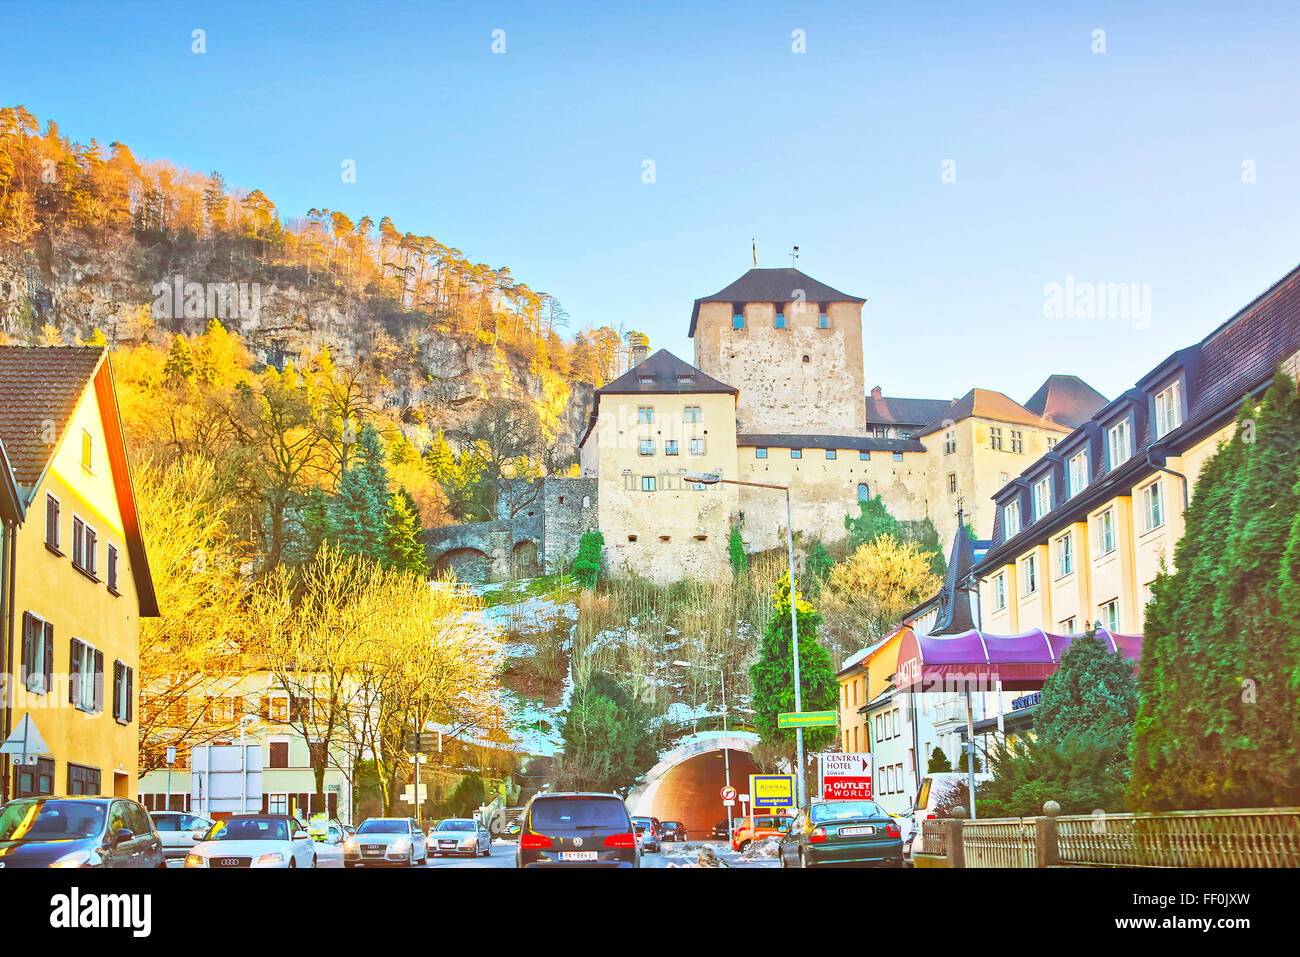 FELDKIRCH, AUSTRIA - JANUARY 5, 2015: Road View and a village and castle in Austria in winter. Stock Photo